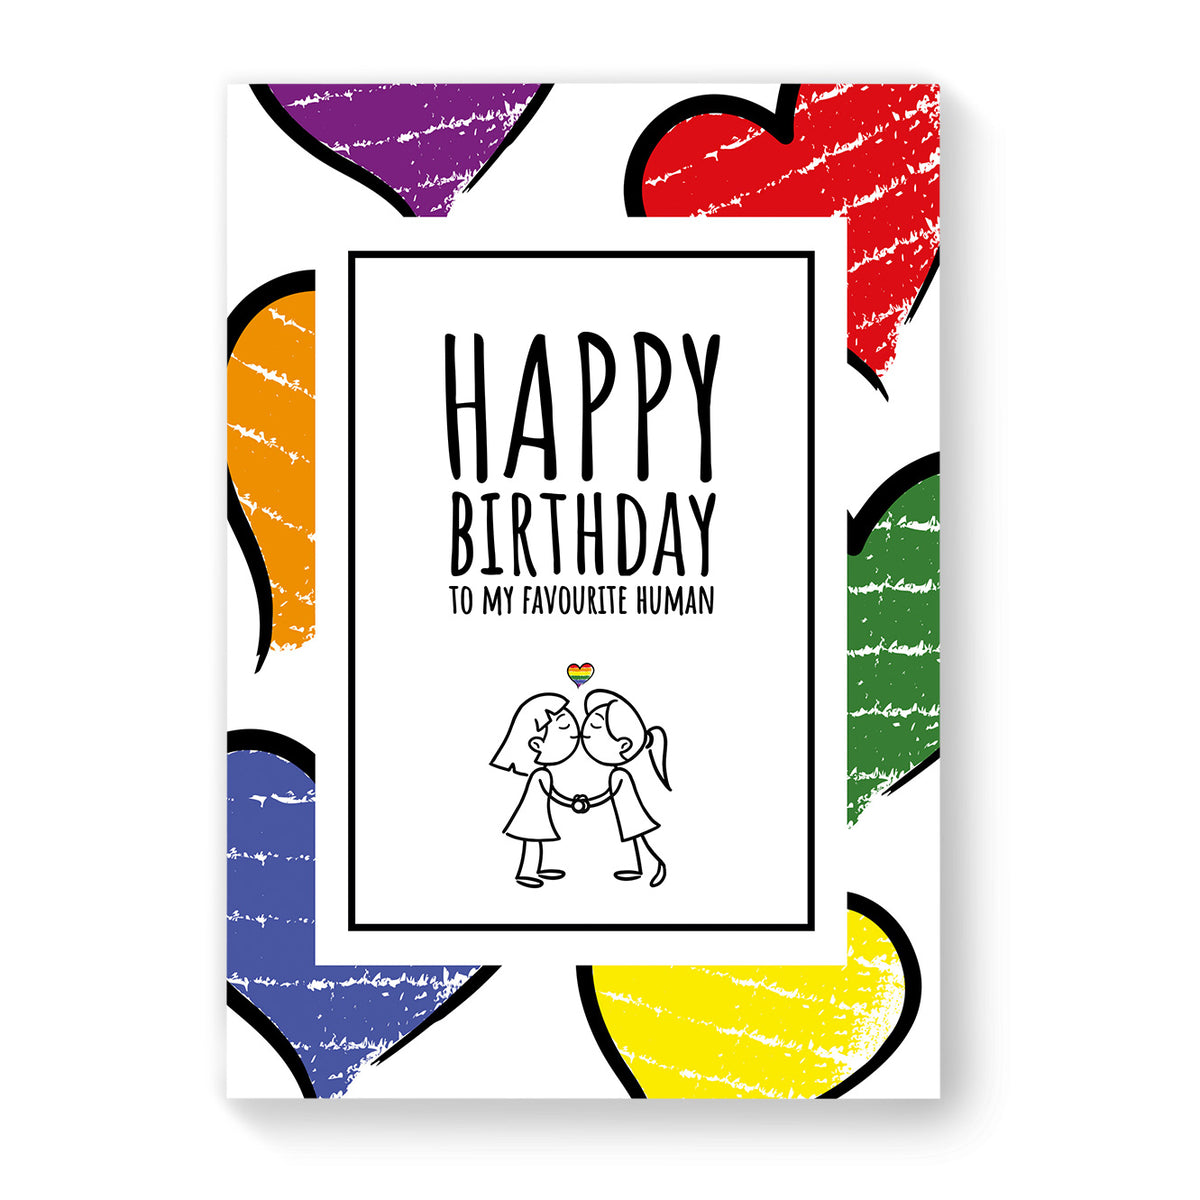 Happy Birthday to my favourite human - Lesbian Gay Birthday Card - Large Heart | Gift